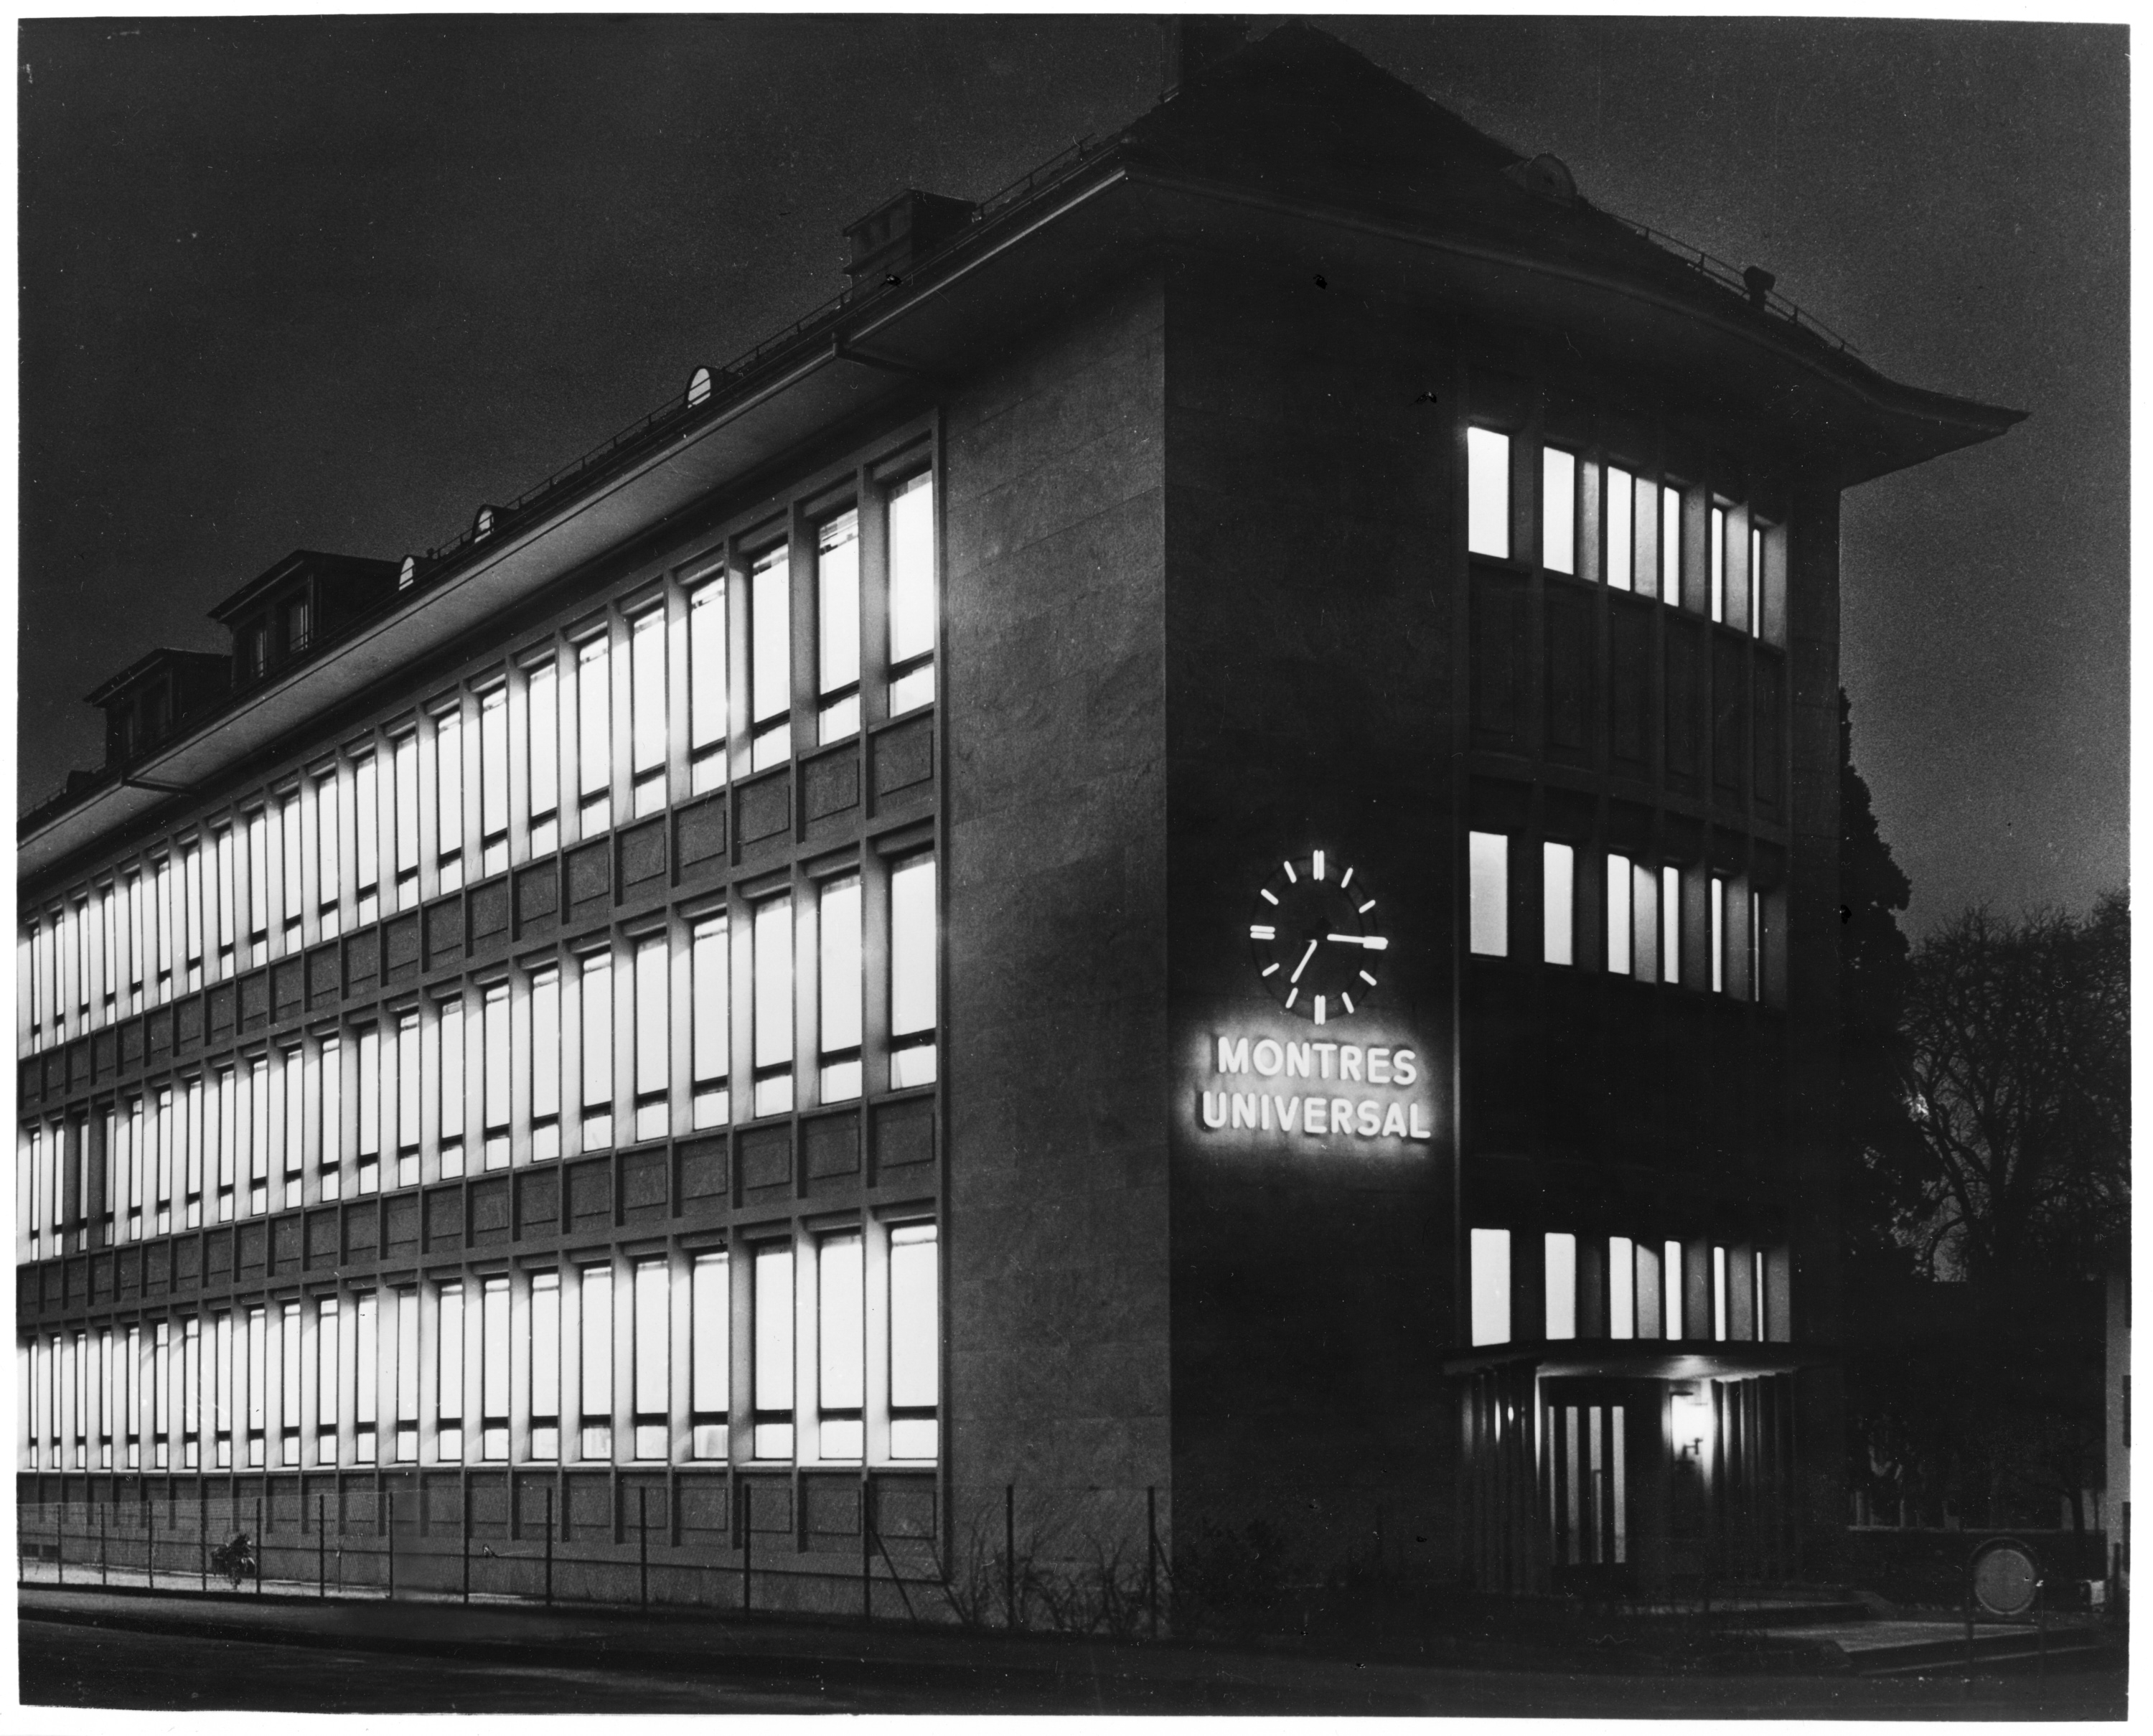 05_Universal_Geneve_the_new_factory_inaugurated_in_1956_Carouge__municipality_in_the_Canton_of_Geneva semanalclasico